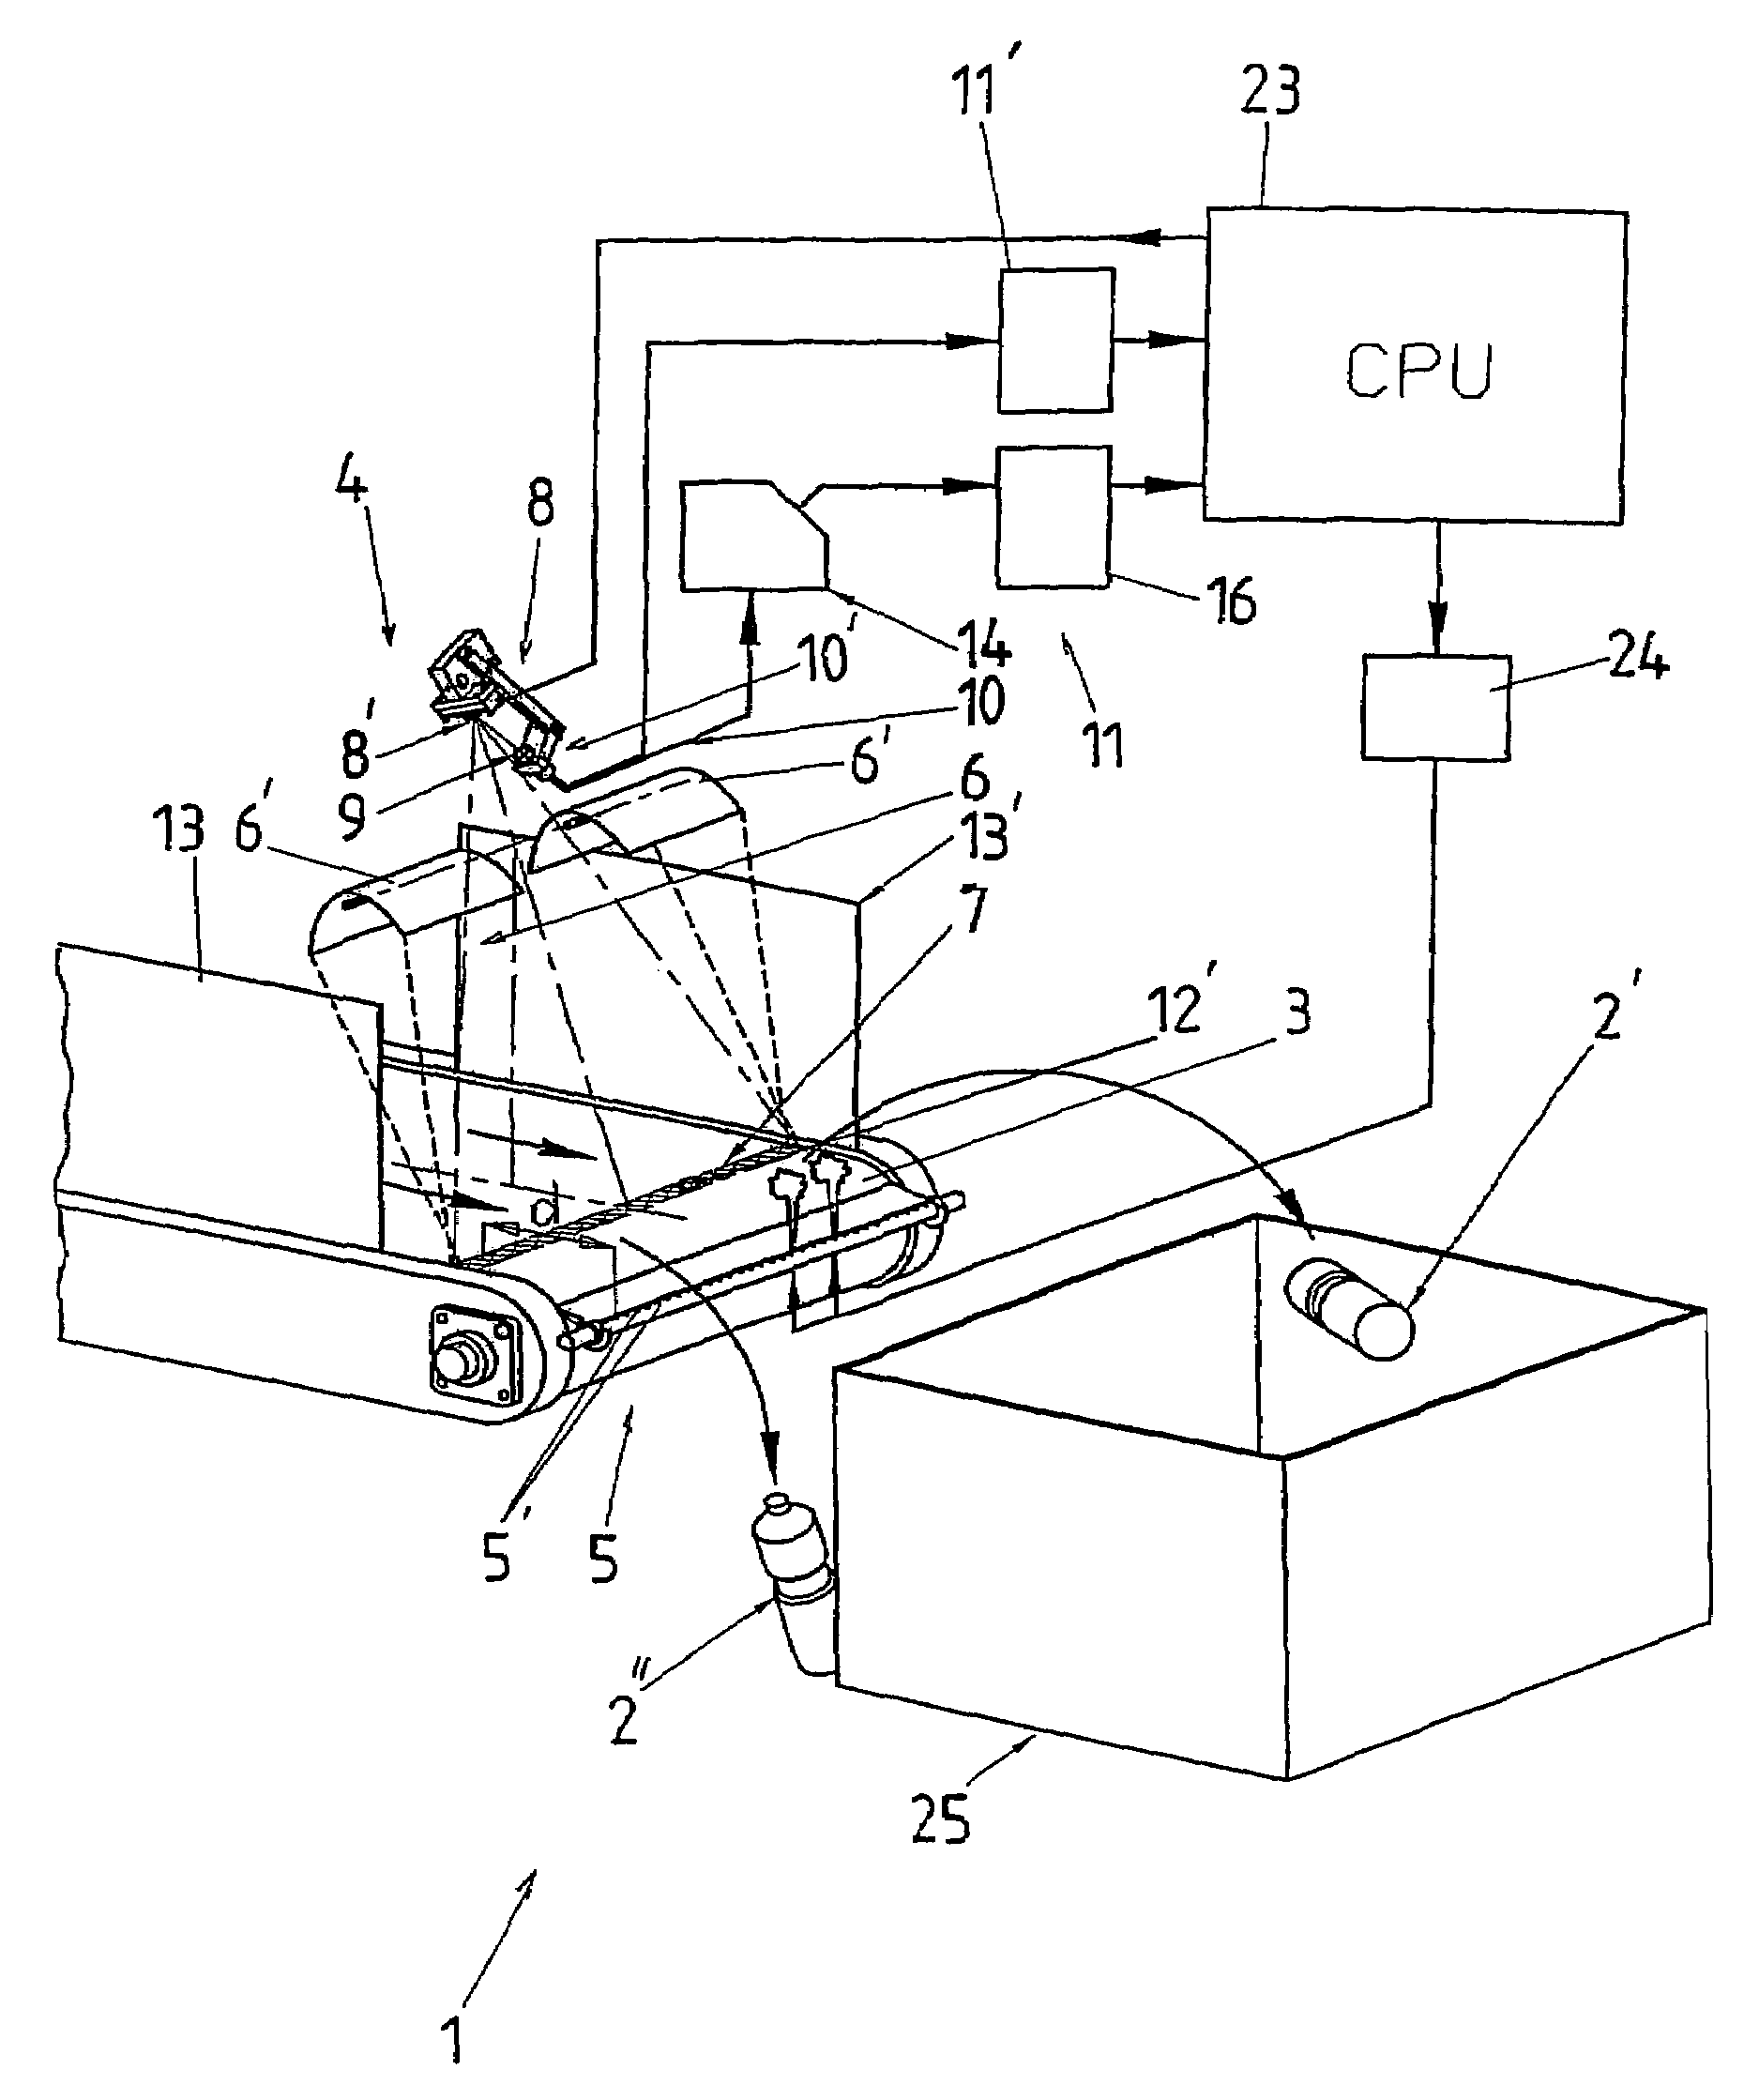 Device and method for automatically inspecting objects traveling in an essentially monolayer flow